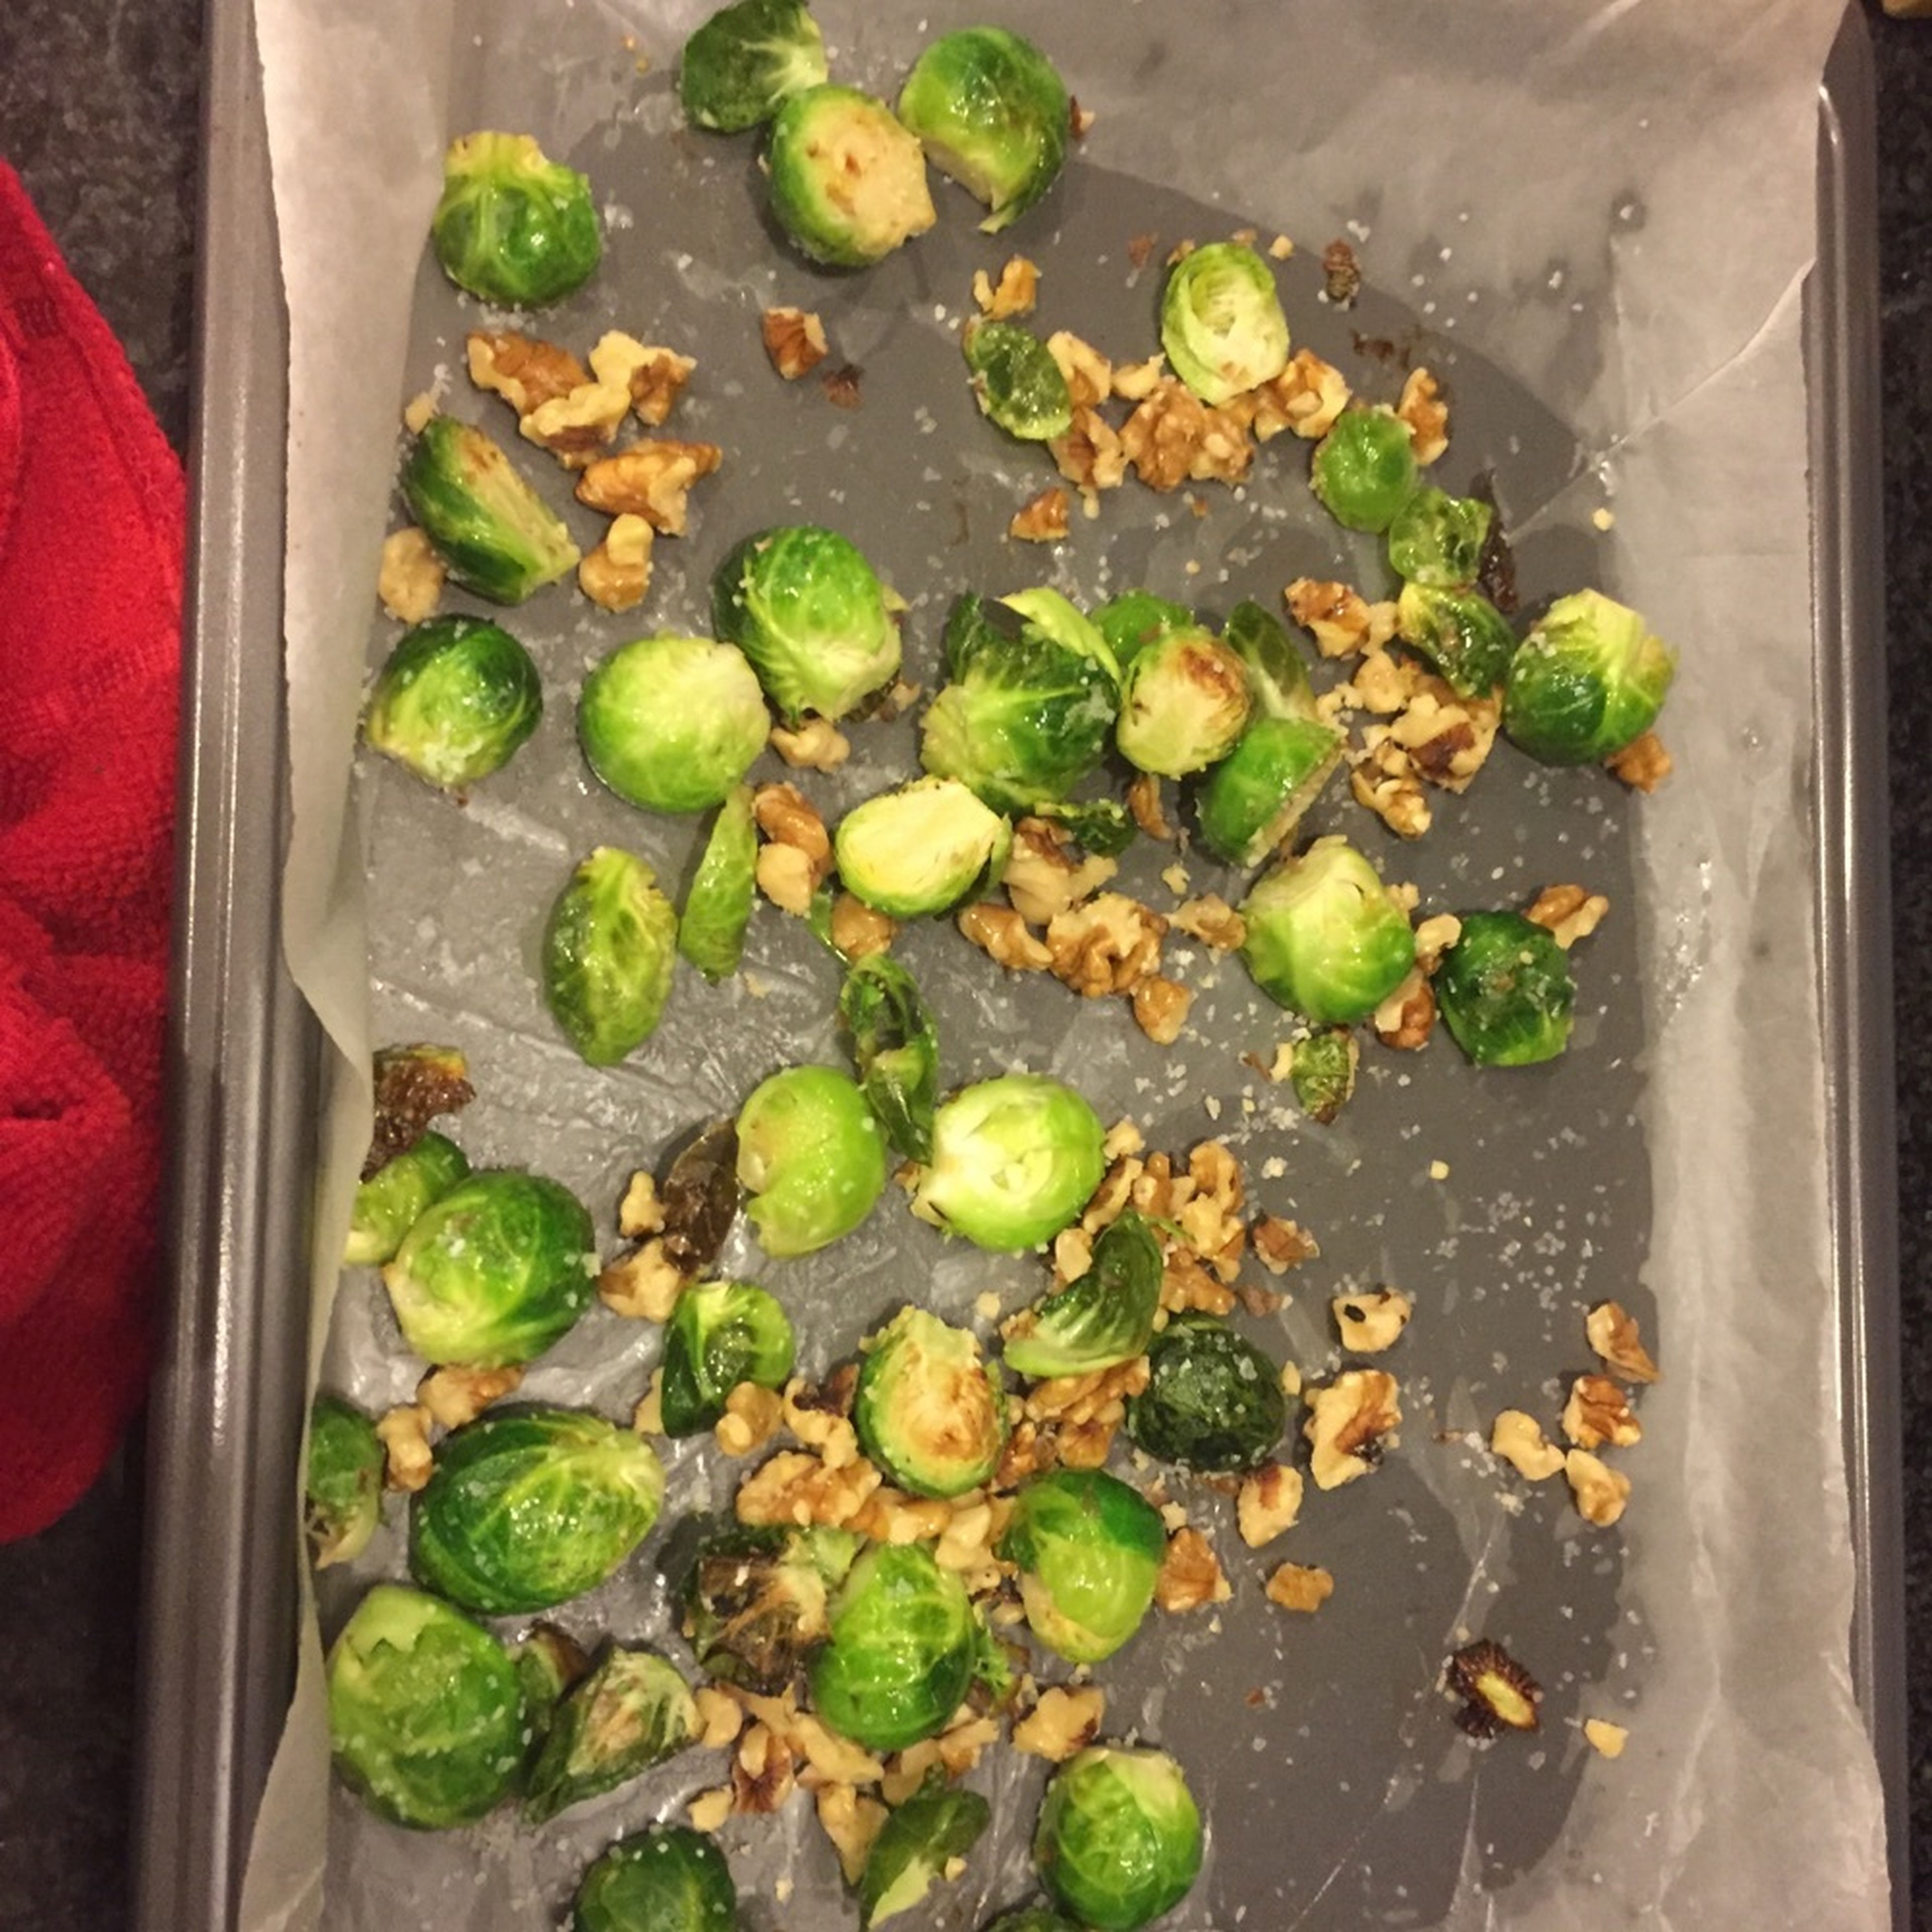 Pre-heat oven to 220°C/425°F. Halve Brussels sprouts. Evenly spread walnuts and halved Brussels sprouts on a baking sheet. Drizzle with part of the olive oil and generously season. Roast for approx. 20 min., tossing once after half of the time is up.